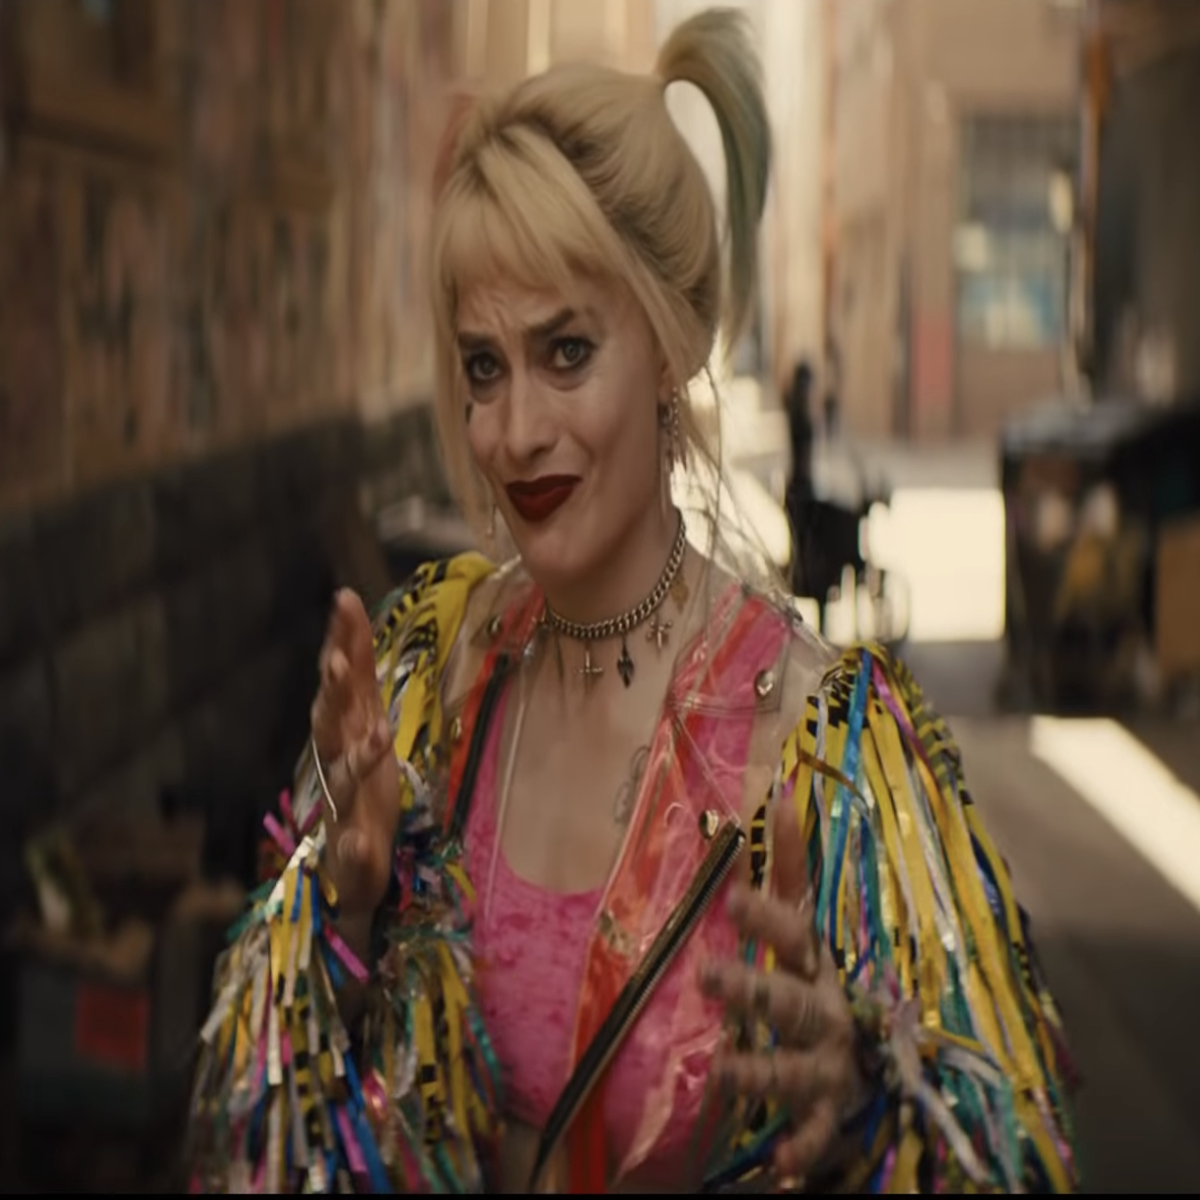 Watch Margot Robbie and the Birds of Prey cast discuss the new film